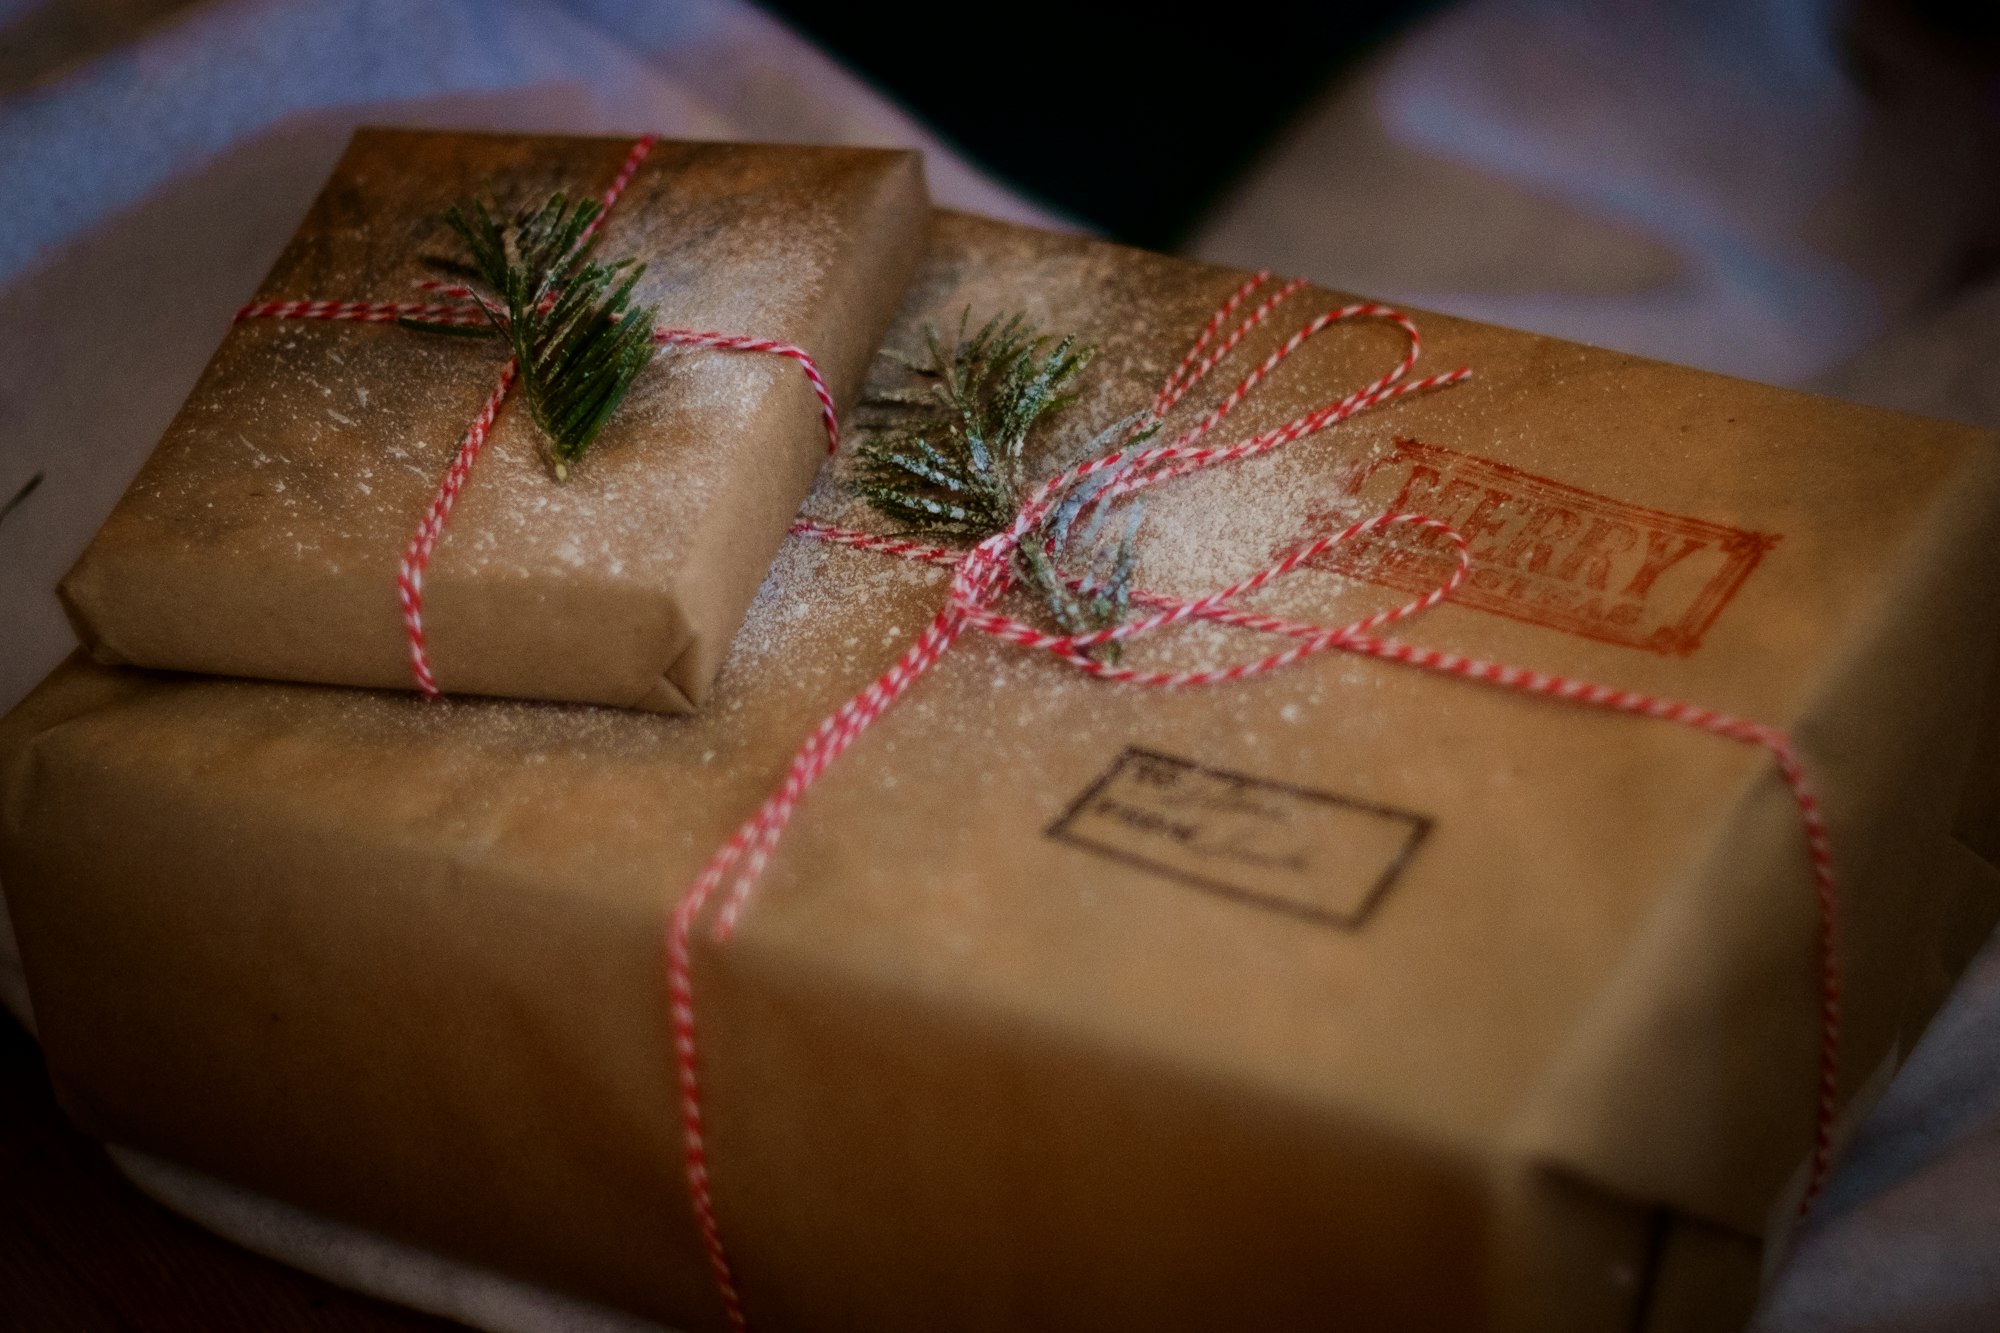 One year I perhaps went a bit “extra” on the holiday secret Santa gift wrapping. I don’t regret anything. As it turns out butcher paper and twine make absolutely perfect gift wrap with the right adjustments.